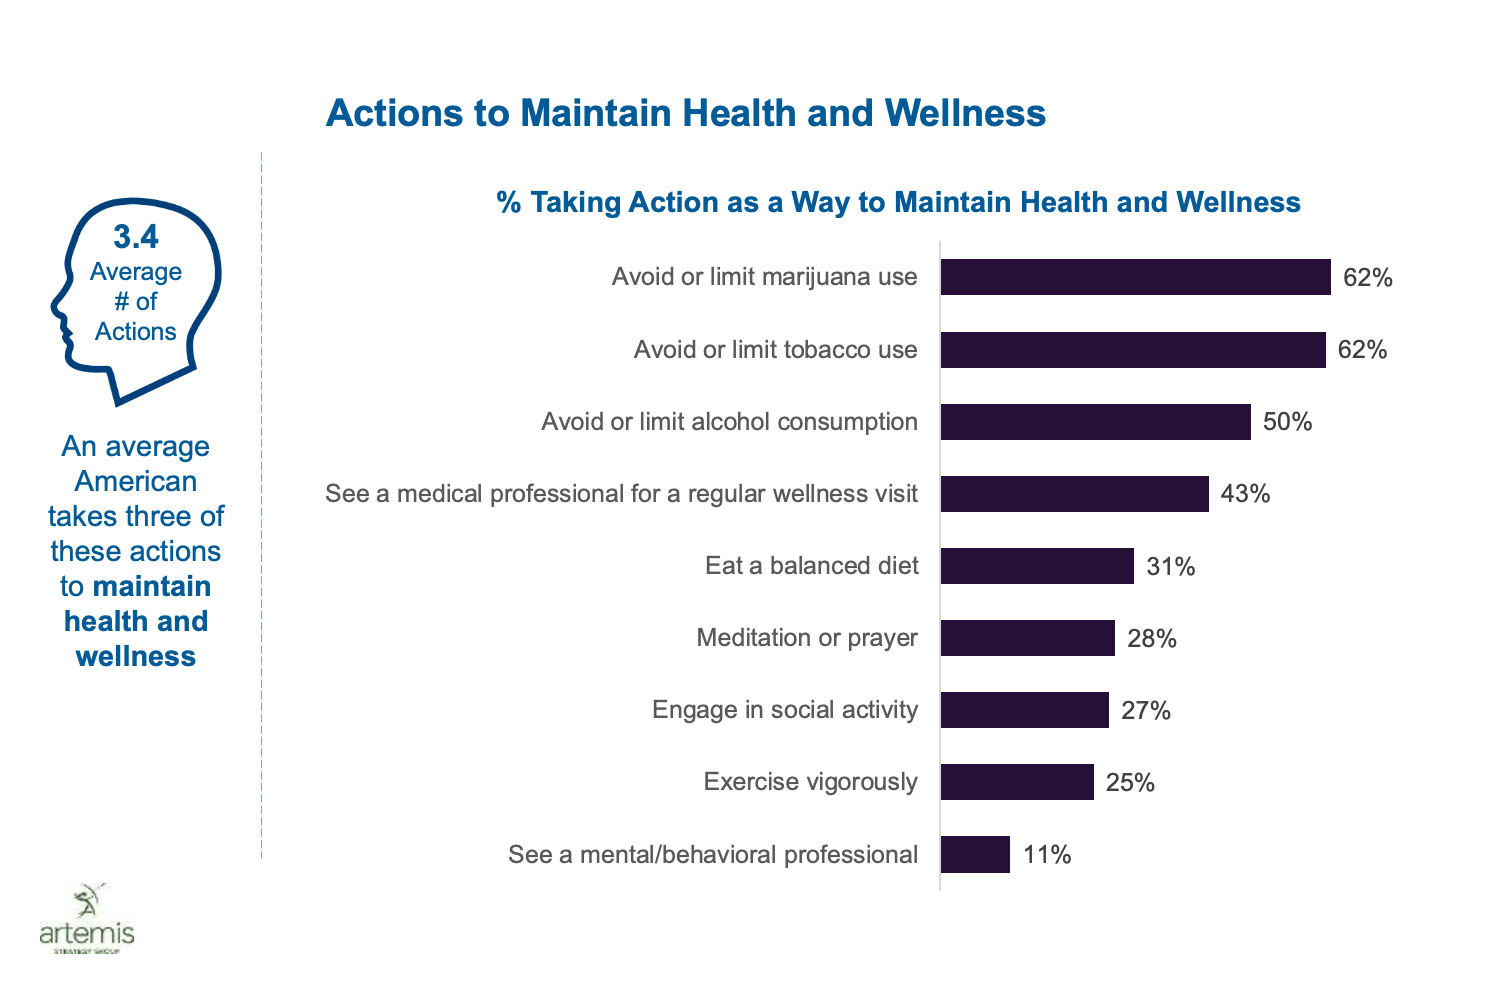 Actions to Maintain Health and Wellness chart